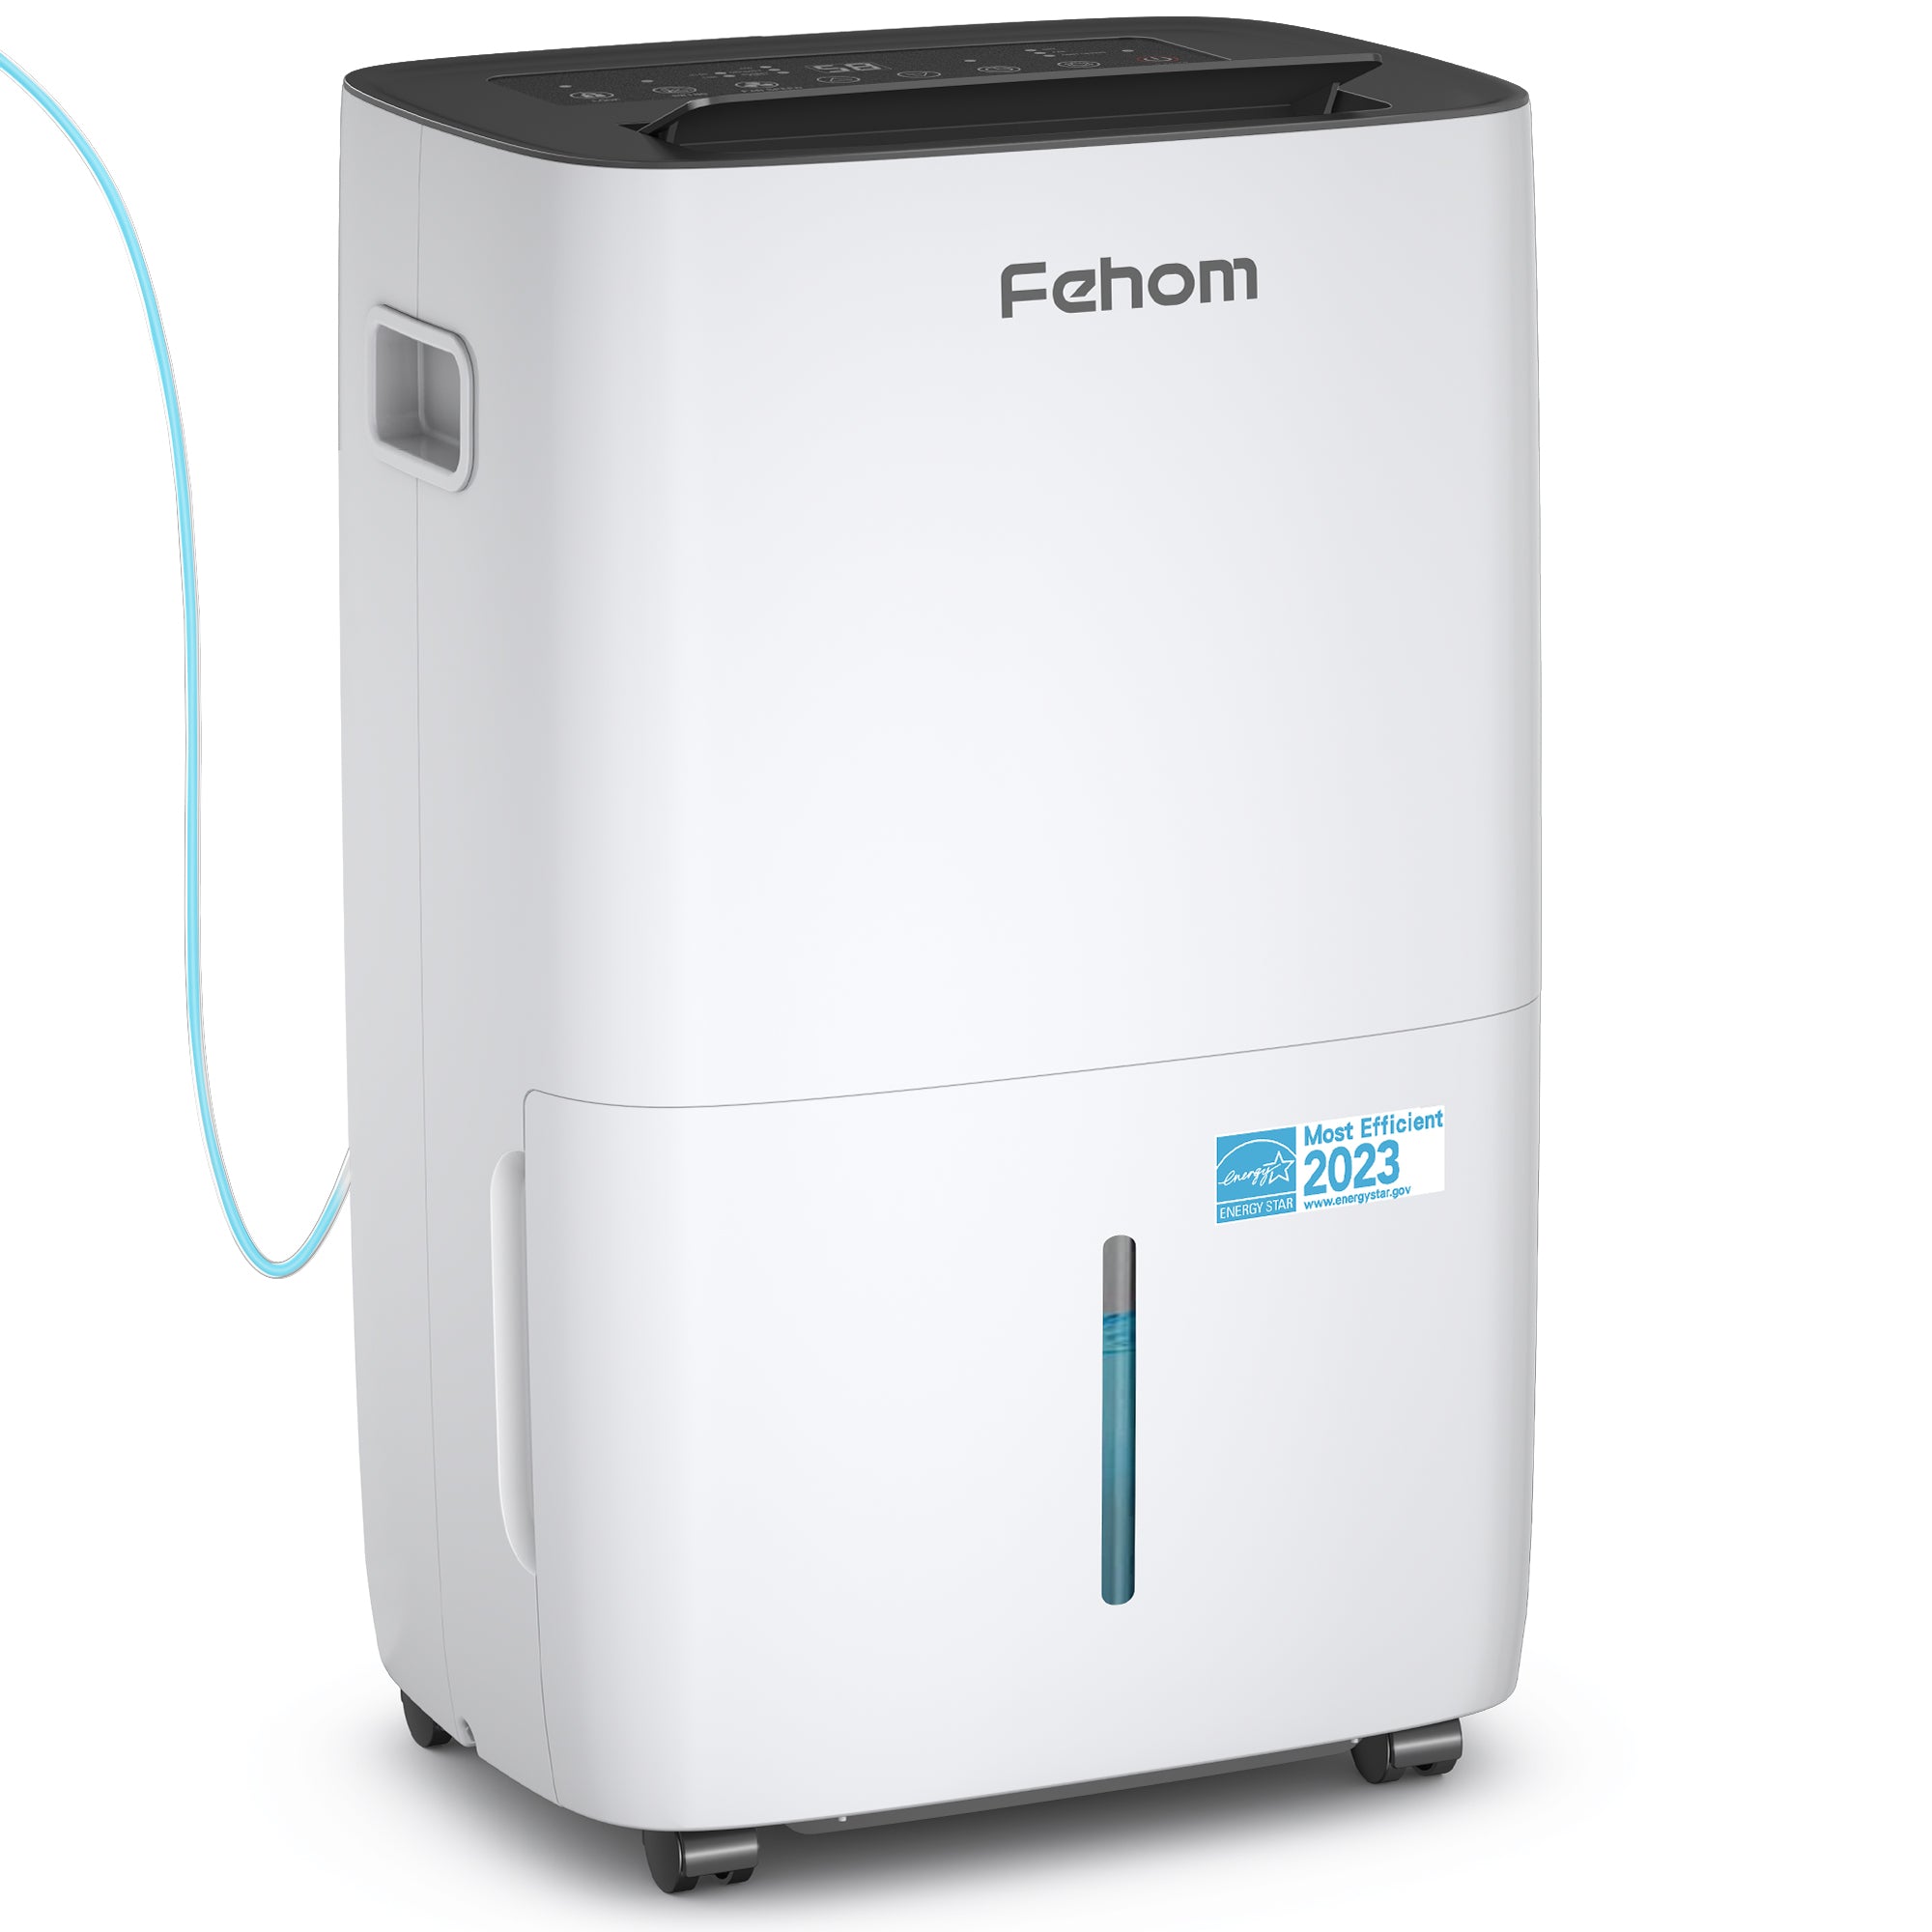 Fehom 150 Pints Dehumidifier with Pump Most Efficient 2023 Energy Star - 7000 Sq. Ft Dehumidifier for Basement with Drain Hose and 1.85 Gal Water Tank, Smart Dehumidifiers for Large Rooms(Model: JD026L-150PM)